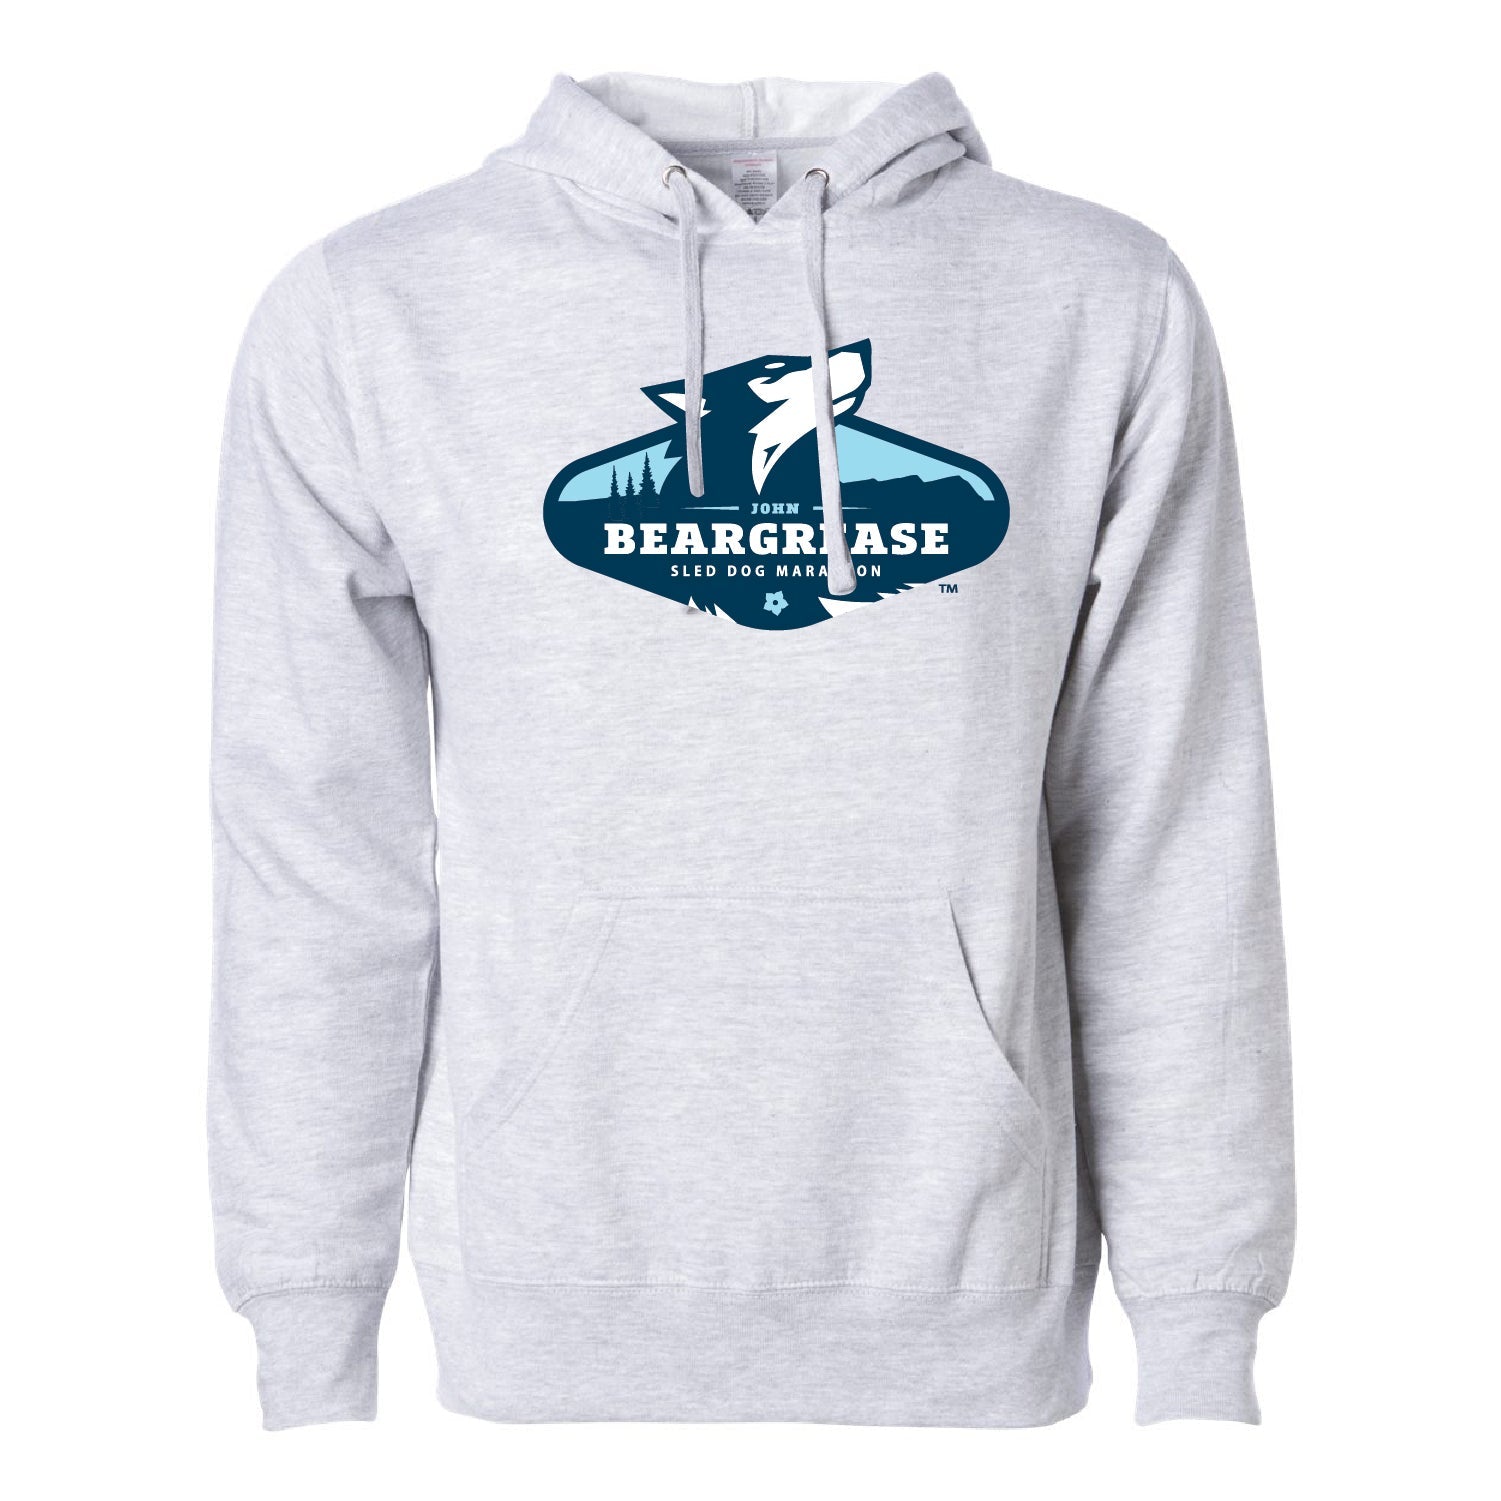 Beargrease Midweight Hooded Sweatshirt - DSP On Demand